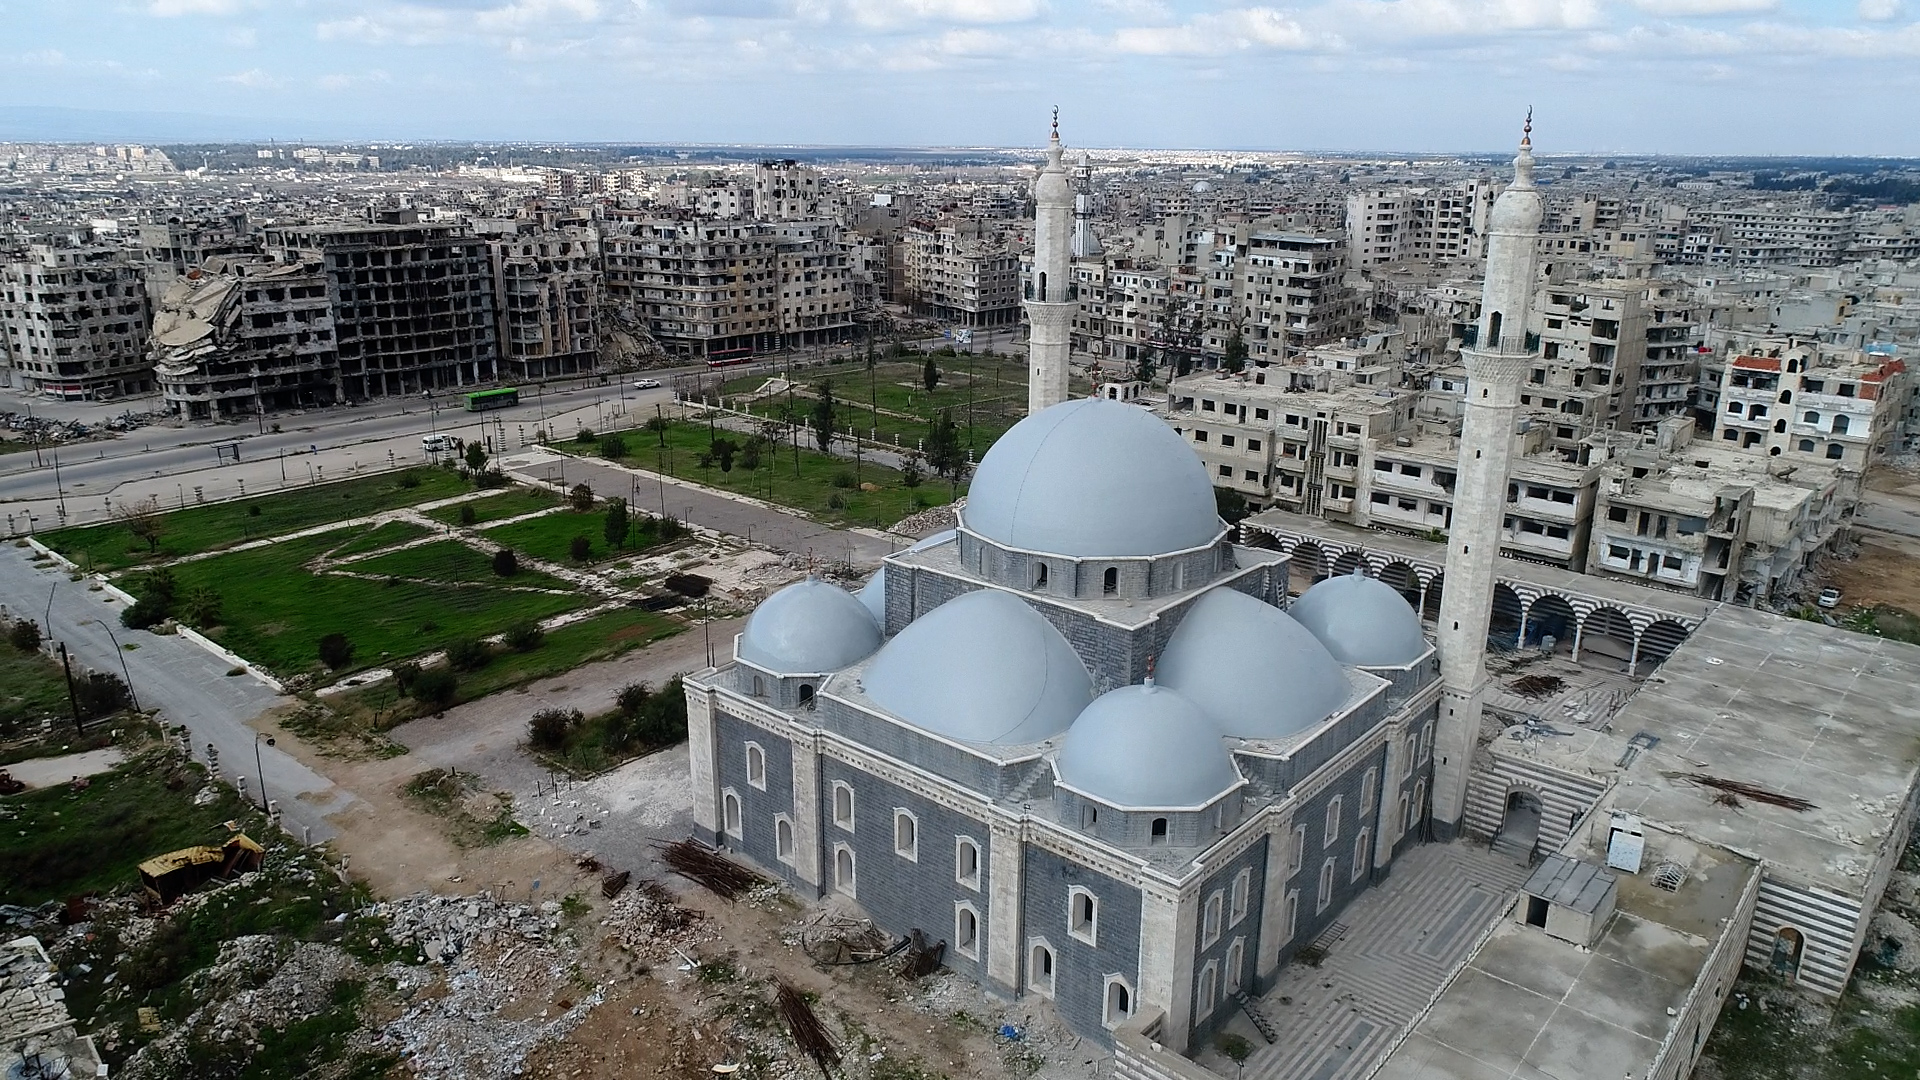 Taken from above, a photograph captures Khalid Ibn al-Walid Mosque of Homs, with a visibly damaged building serving as a poignant backdrop, creating a compelling visual contrast.